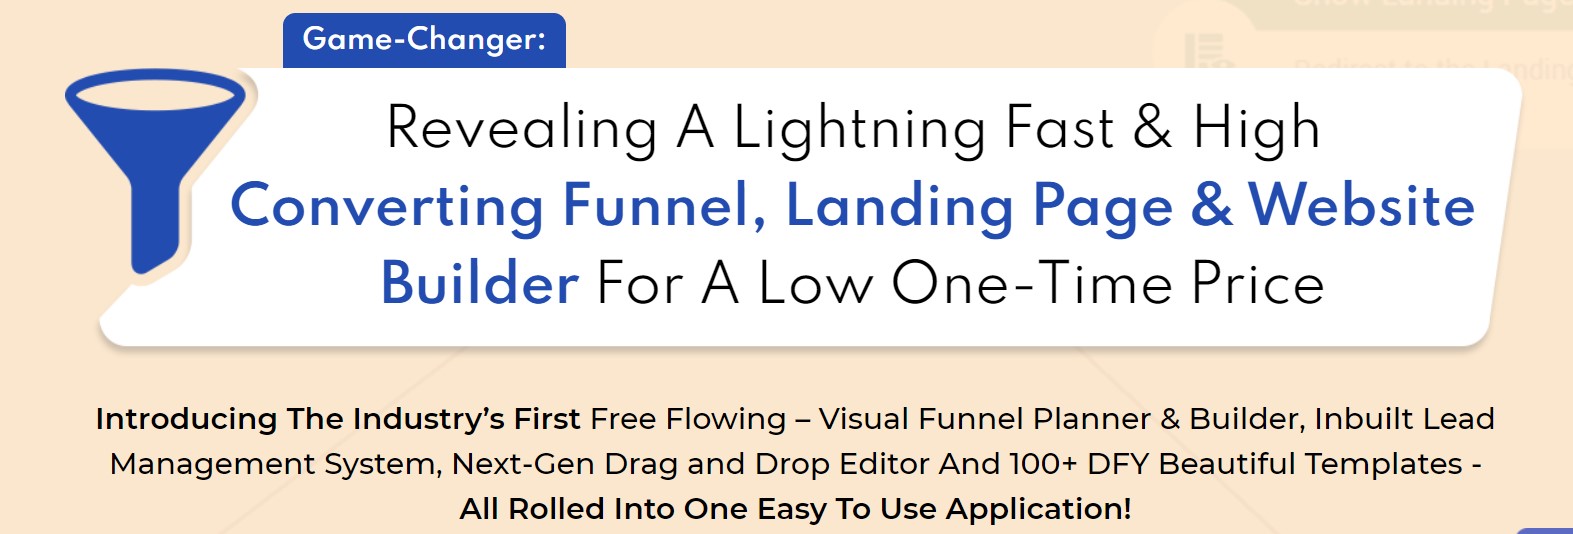 maxfunnels reloaded review